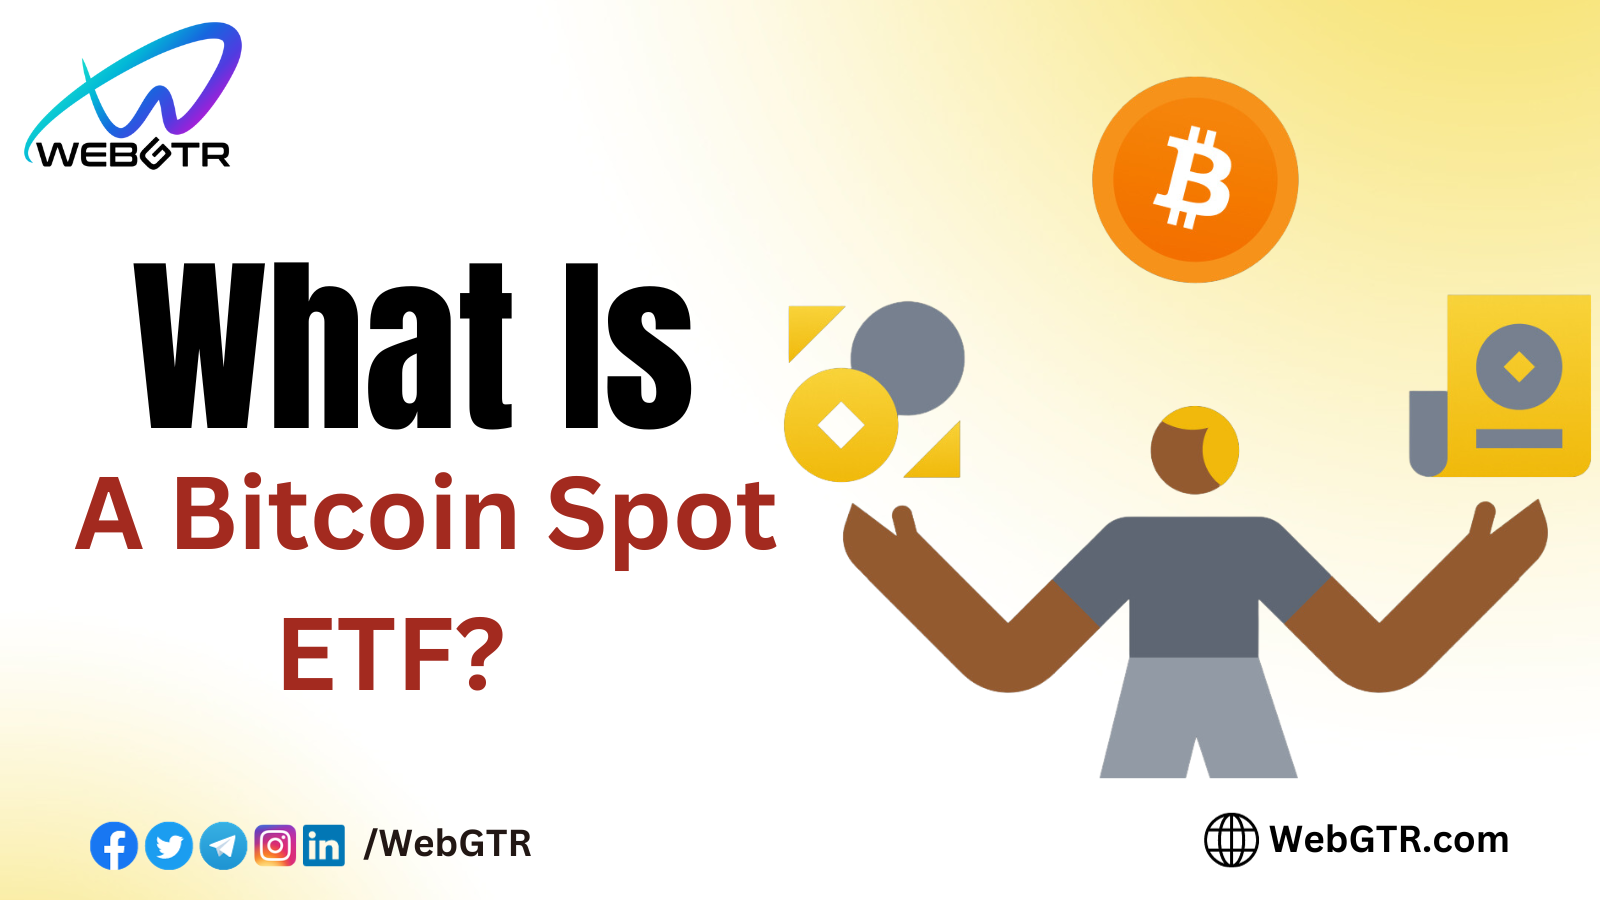 What Is a Bitcoin Spot ETF?